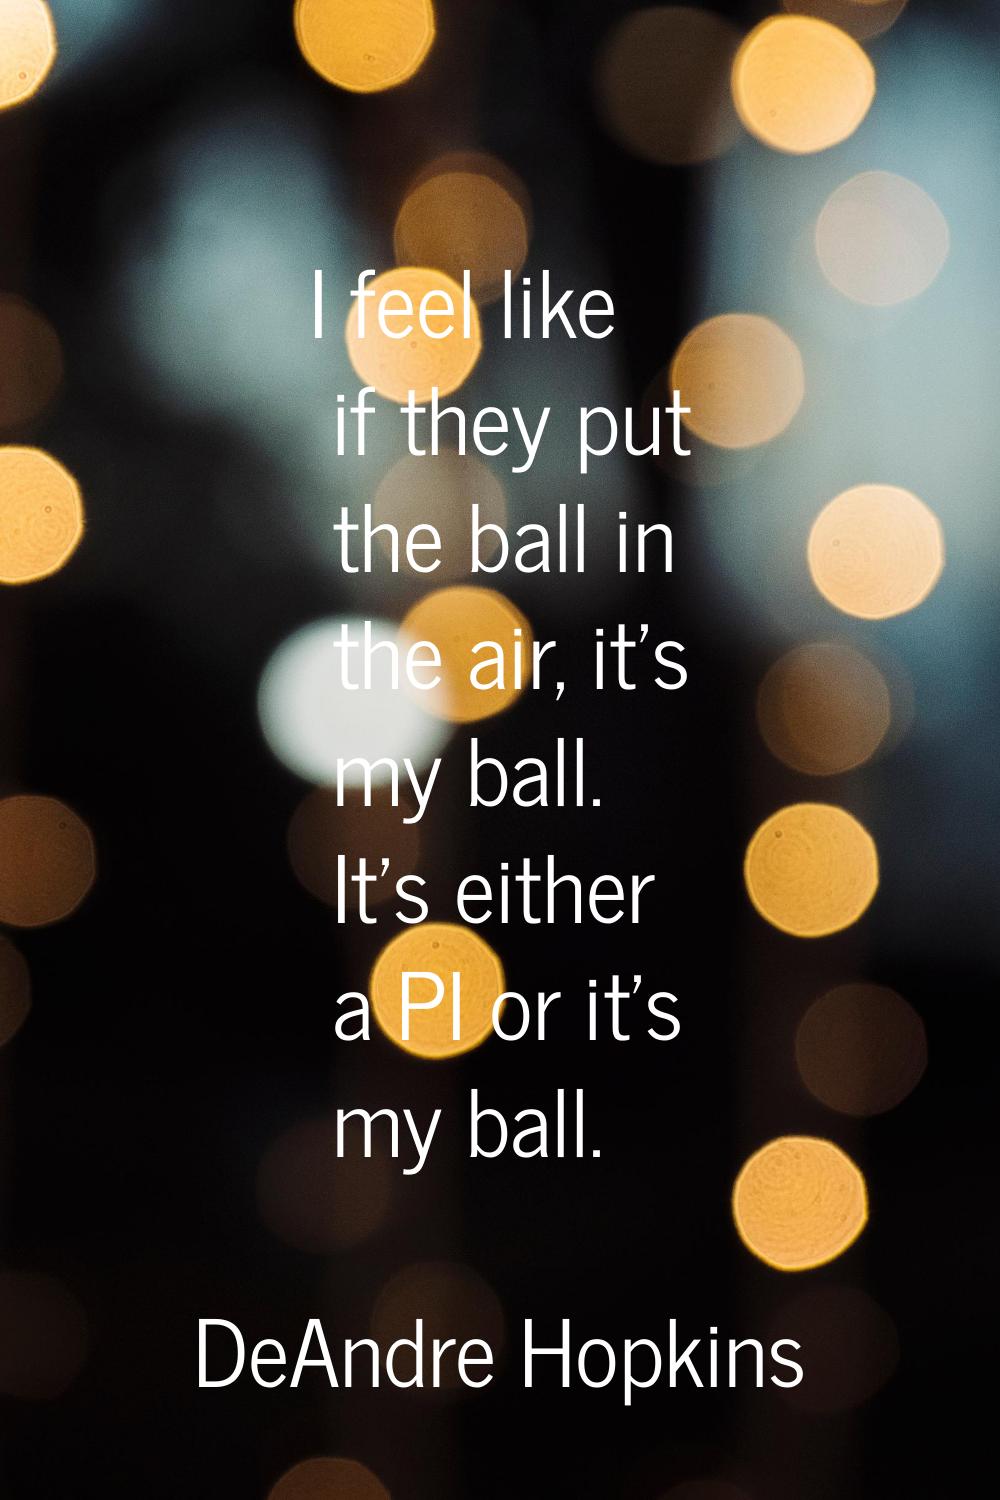 I feel like if they put the ball in the air, it's my ball. It's either a PI or it's my ball.